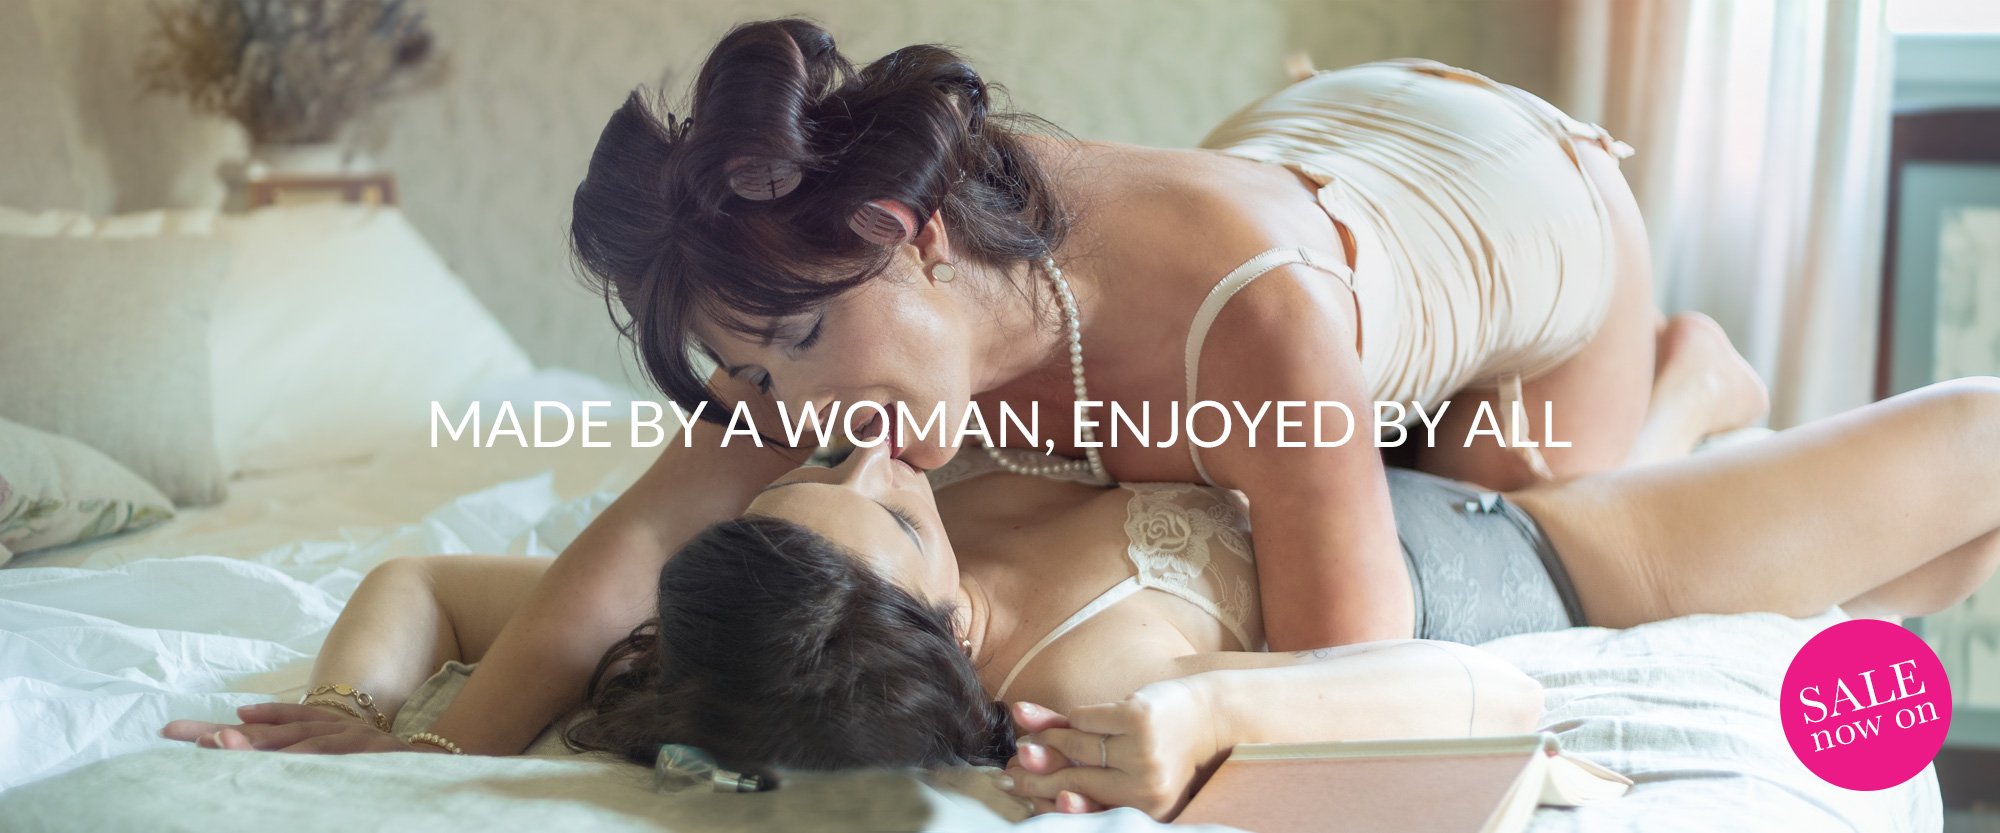 Ethical Porn, Beautiful Tasteful Erotic Films & Stories For Women